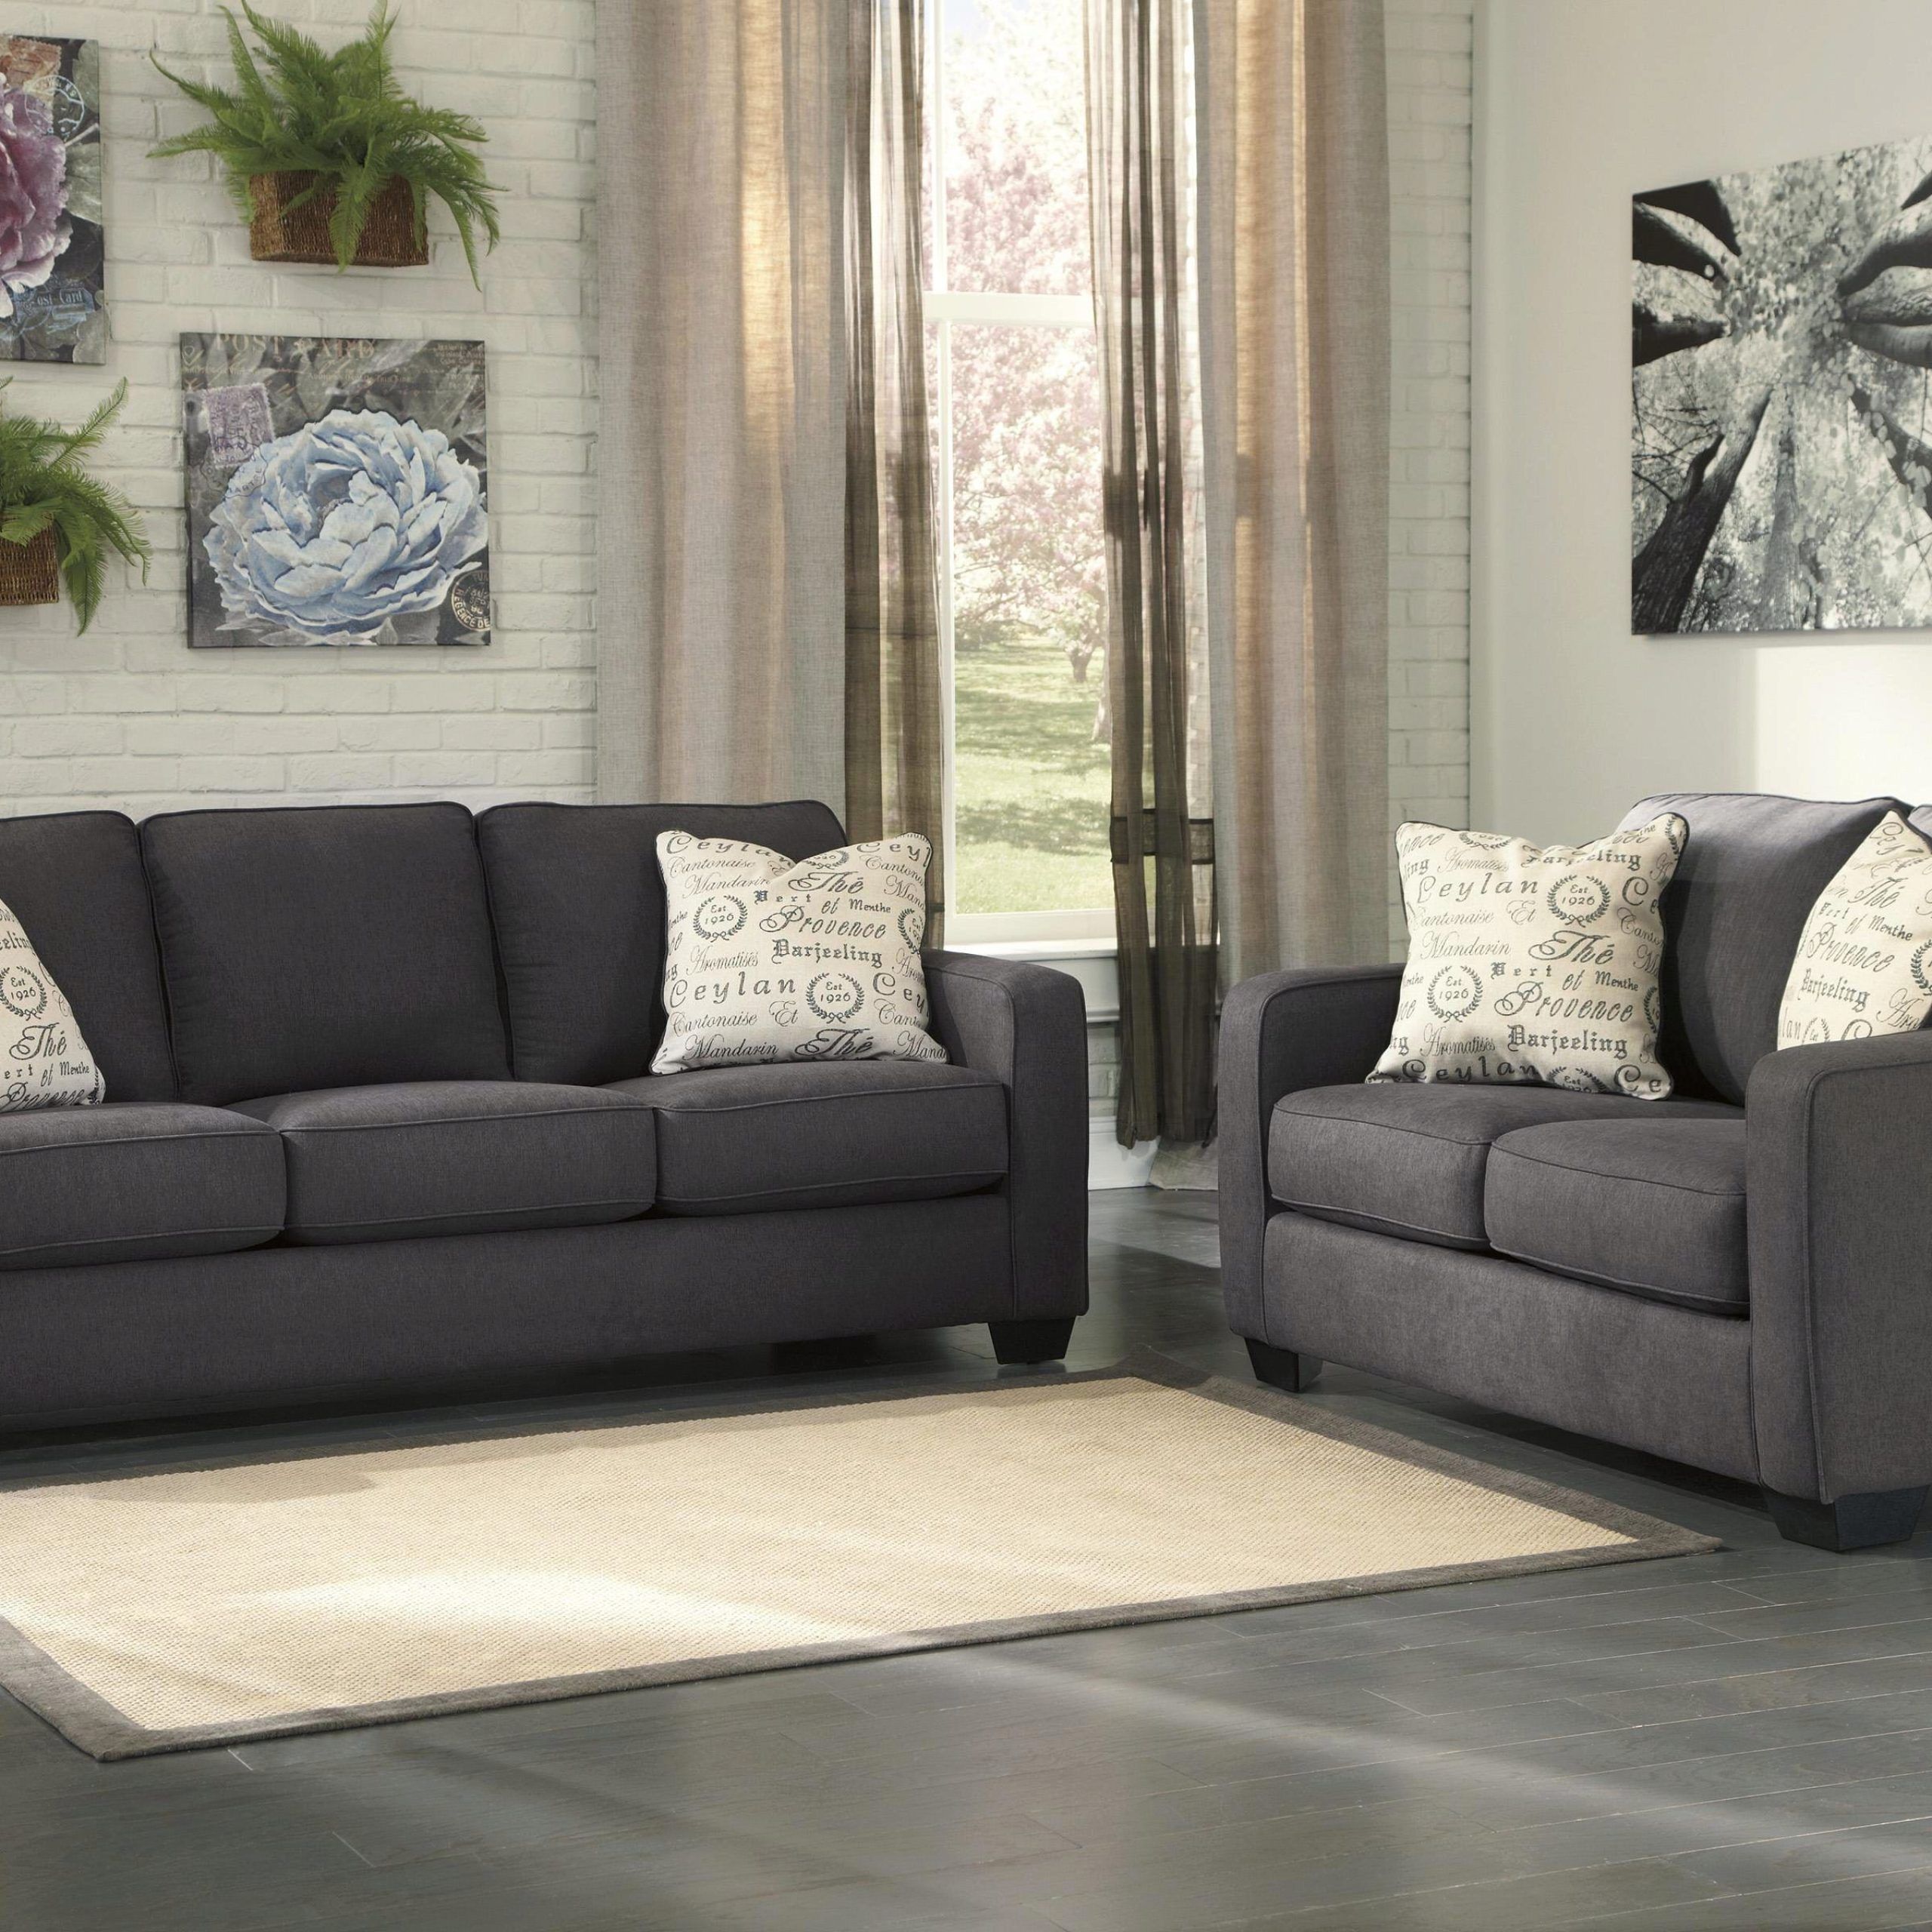 Charcoal Linen Fabric Upholstery Sofa & Loveseat Set 2pcs Casual Ashley Inside Light Charcoal Linen Sofas (View 9 of 20)